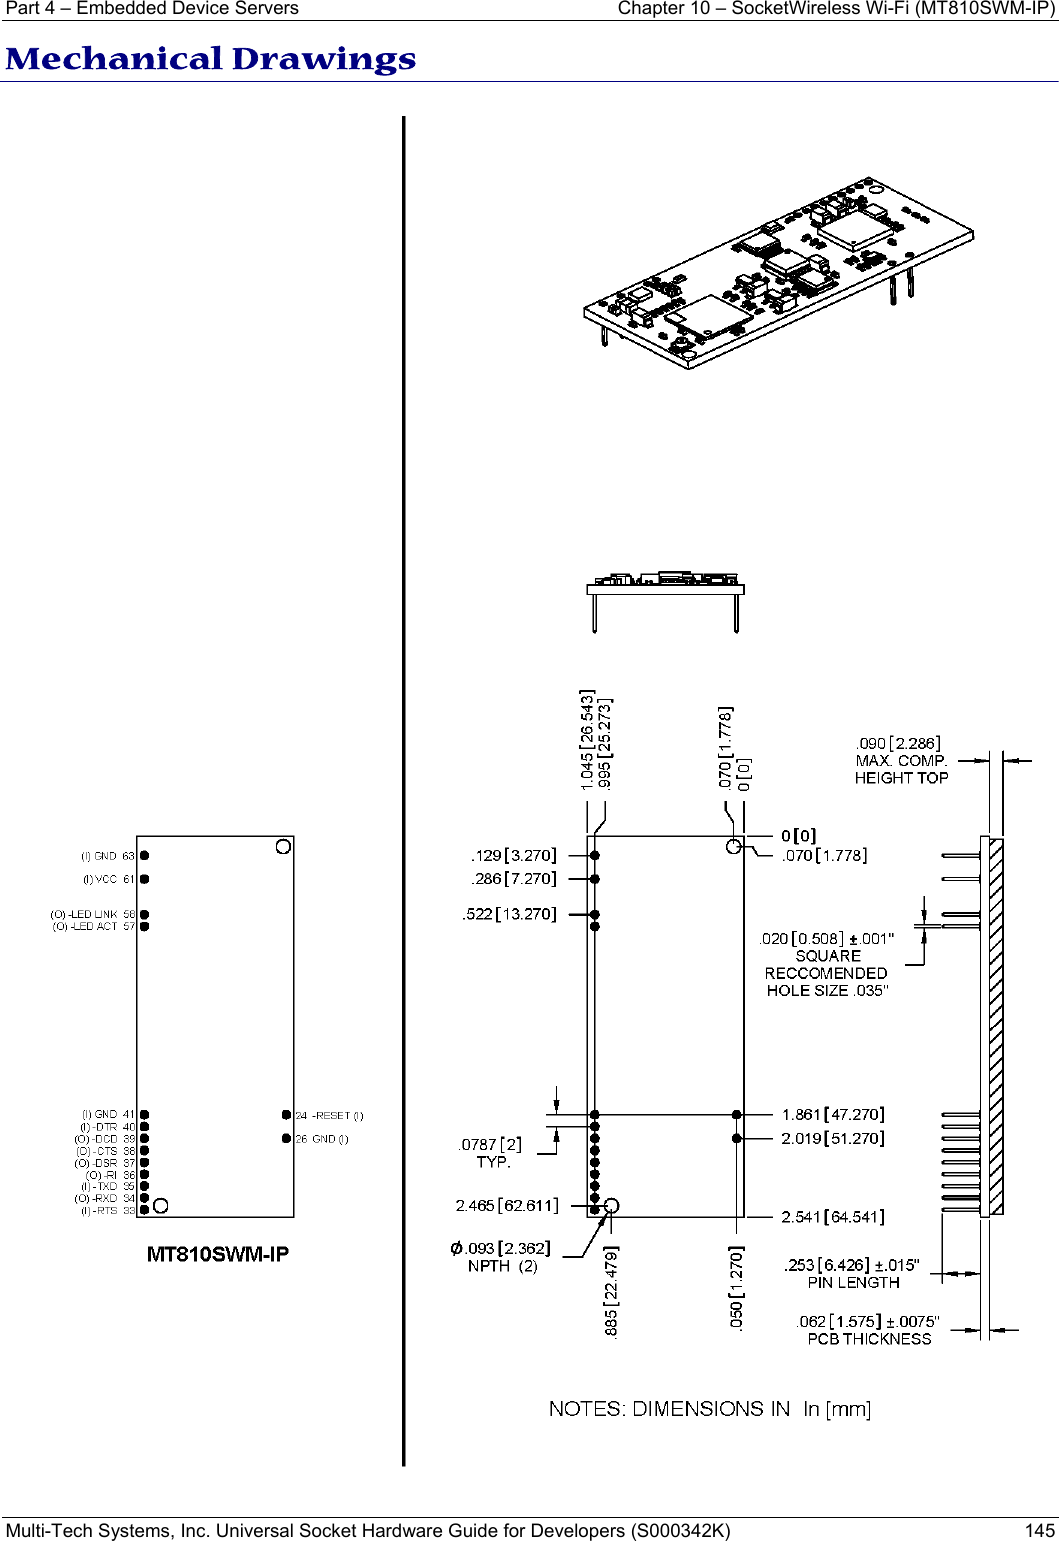 Part 4 – Embedded Device Servers  Chapter 10 – SocketWireless Wi-Fi (MT810SWM-IP) Multi-Tech Systems, Inc. Universal Socket Hardware Guide for Developers (S000342K)  145  Mechanical Drawings  